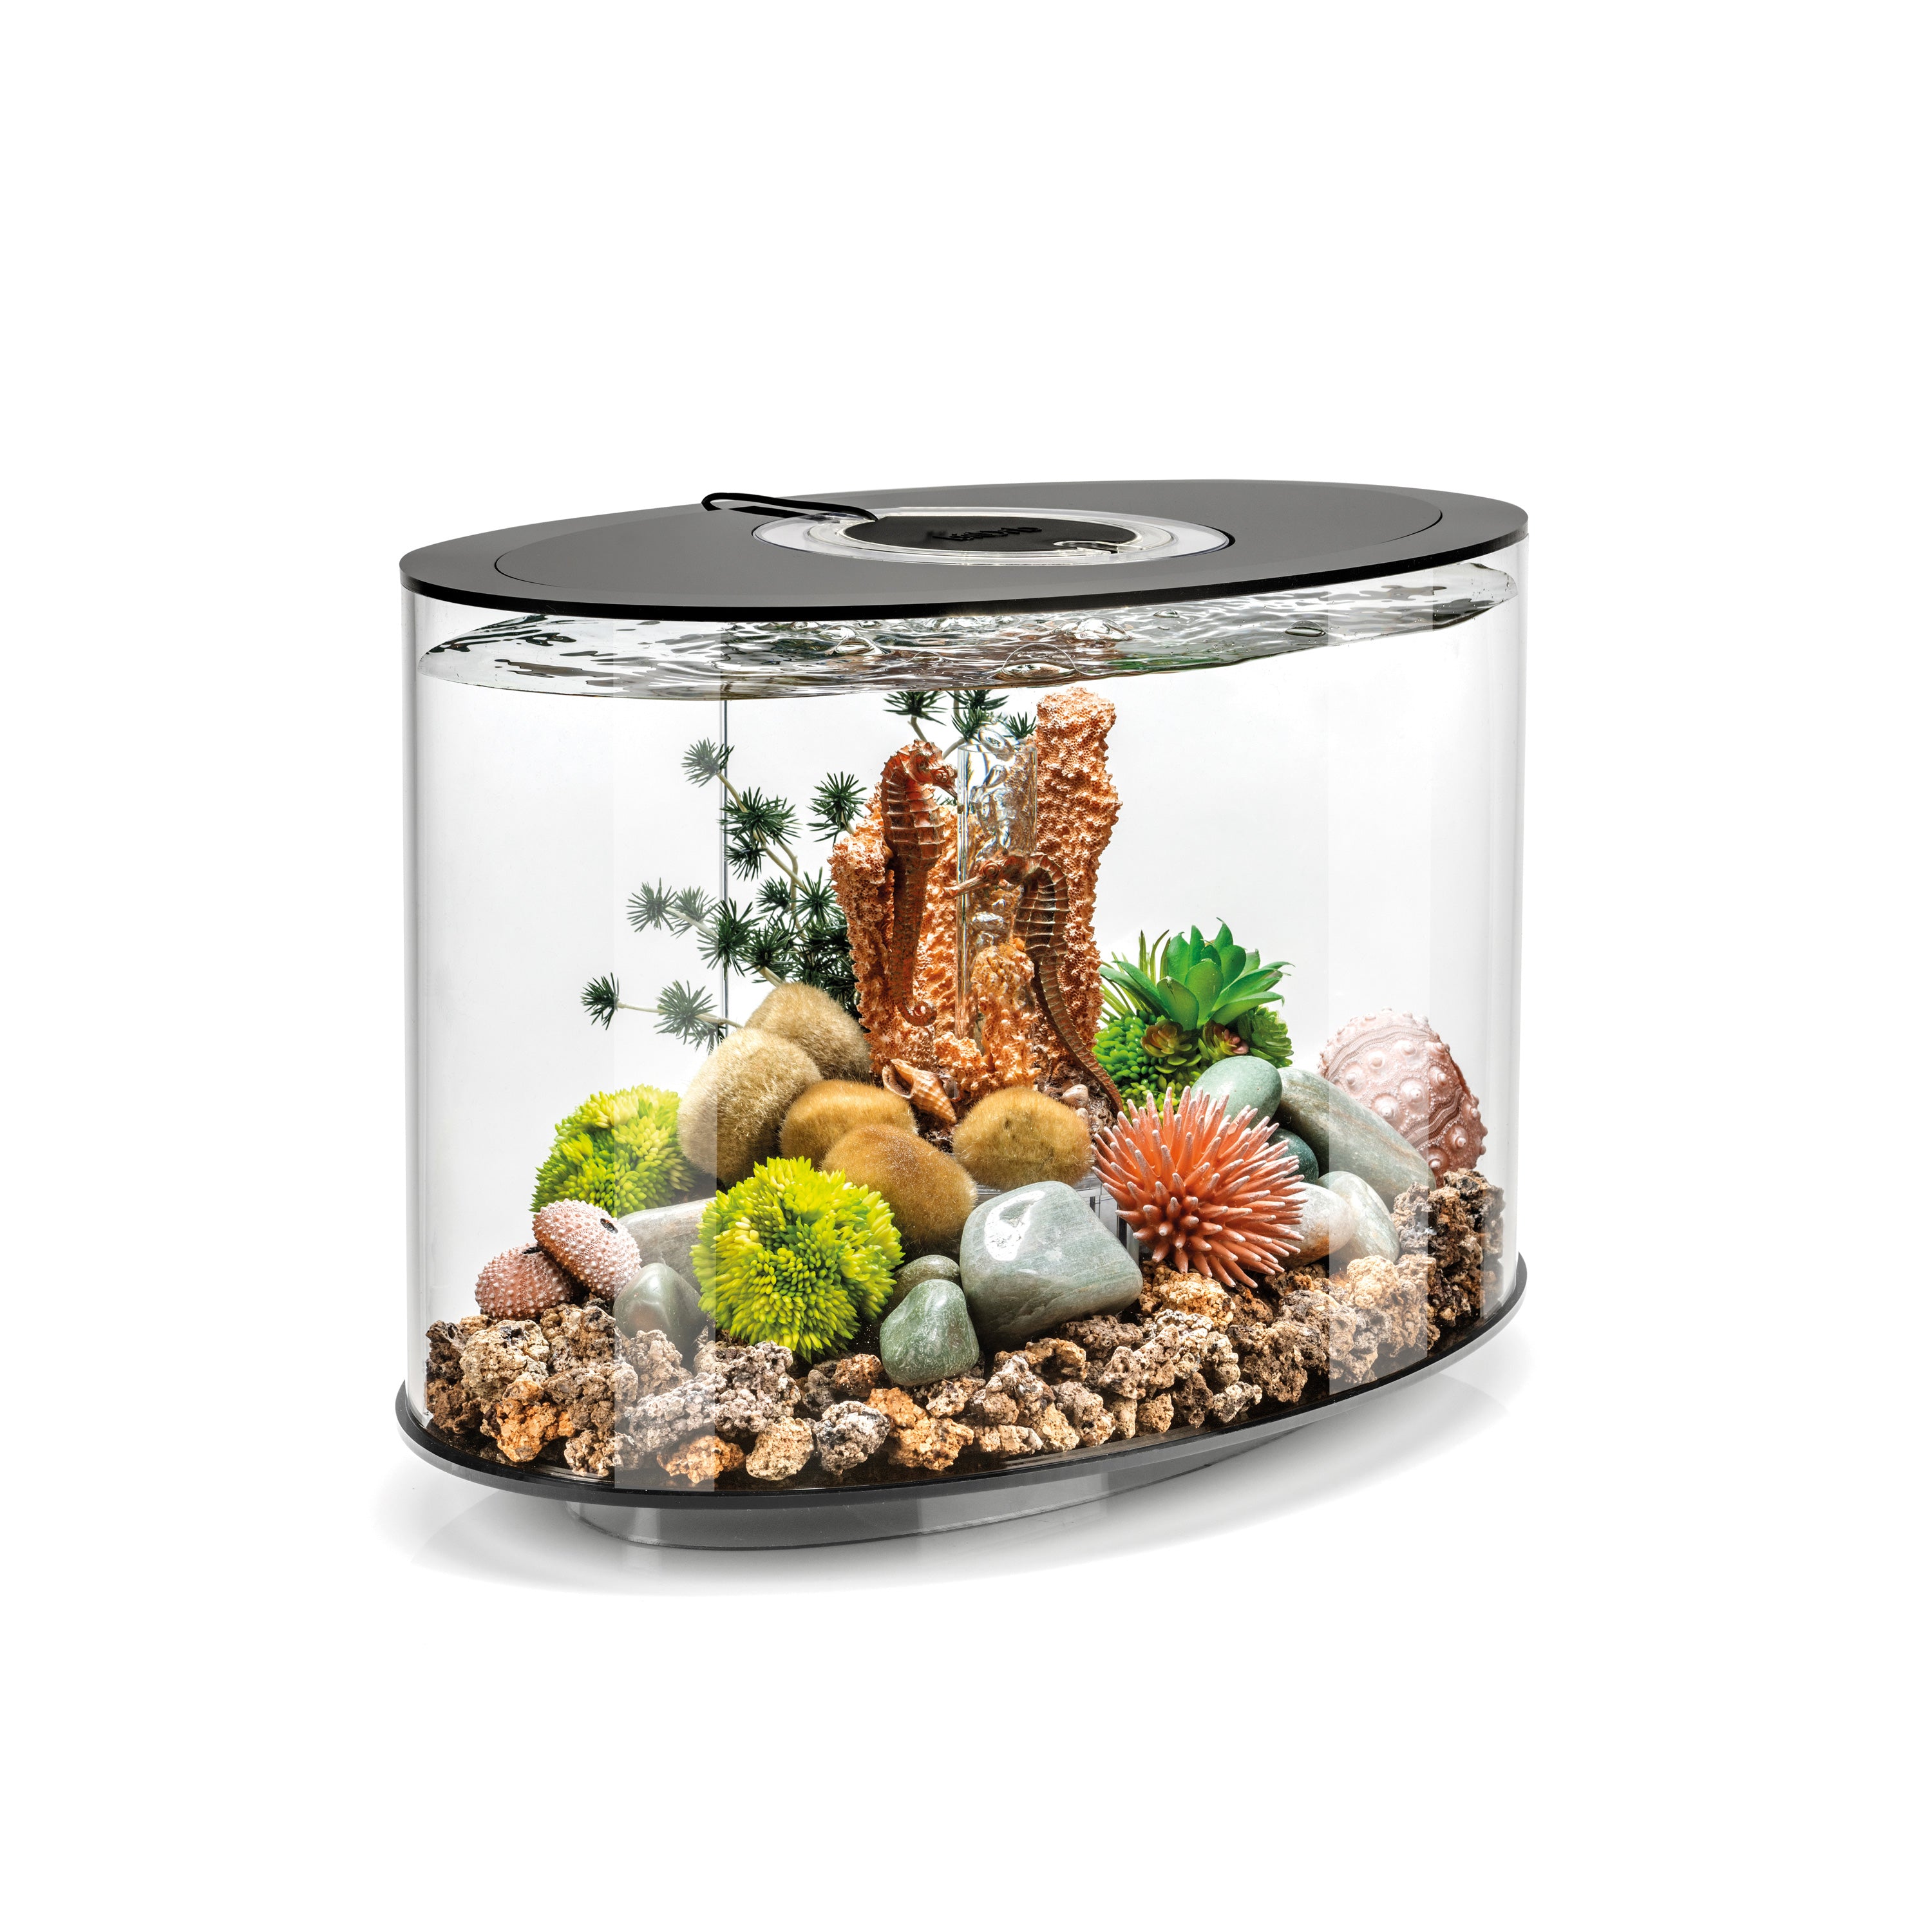 LOOP 15 Aquarium with Standard Light - 4 gallon available in Black